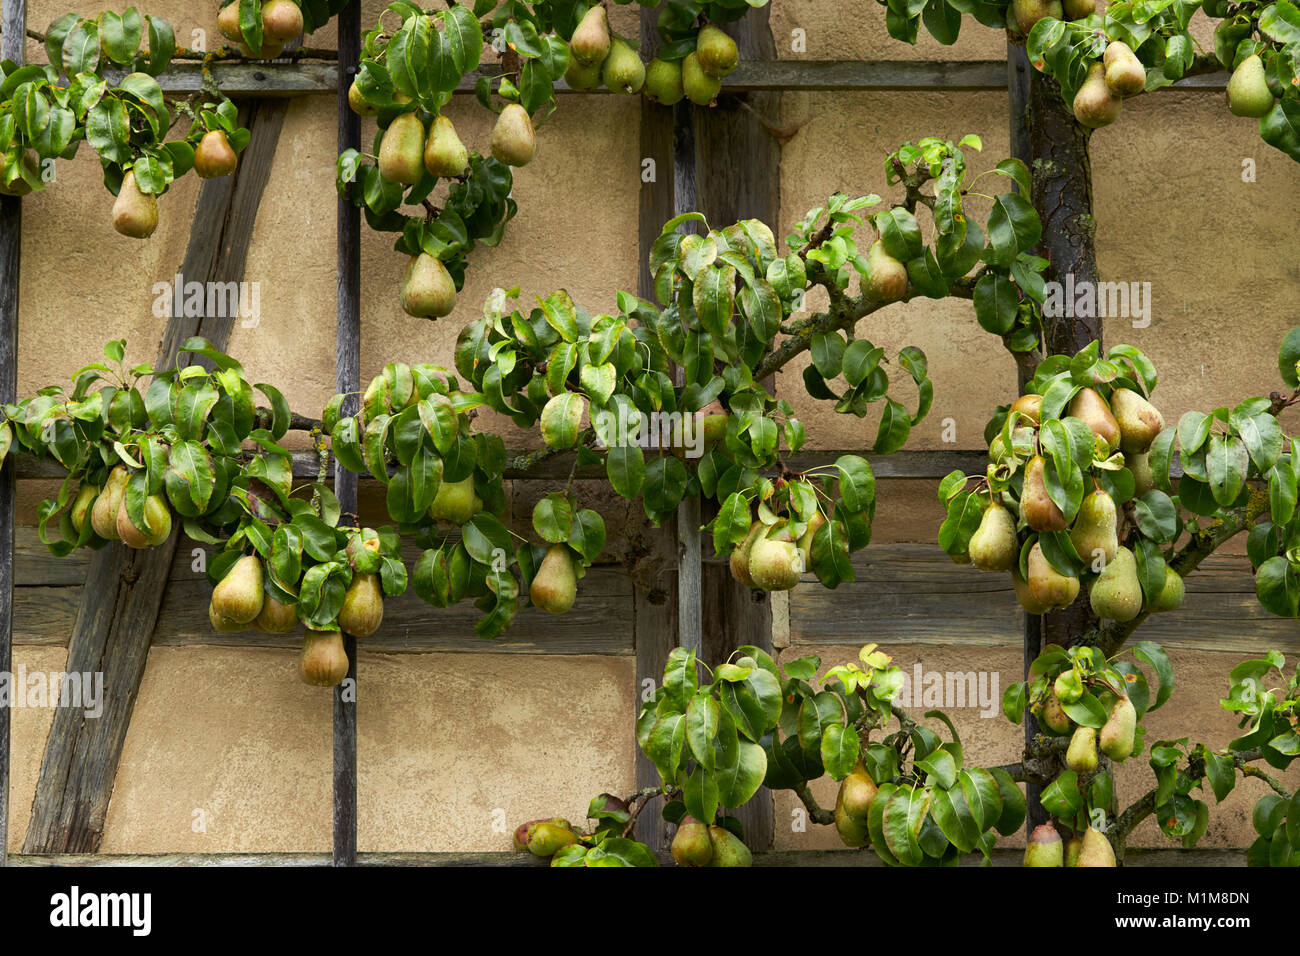 Common Pear, European Pear (Pyrus communis) trained into a horizontal espalier. Germany Stock Photo